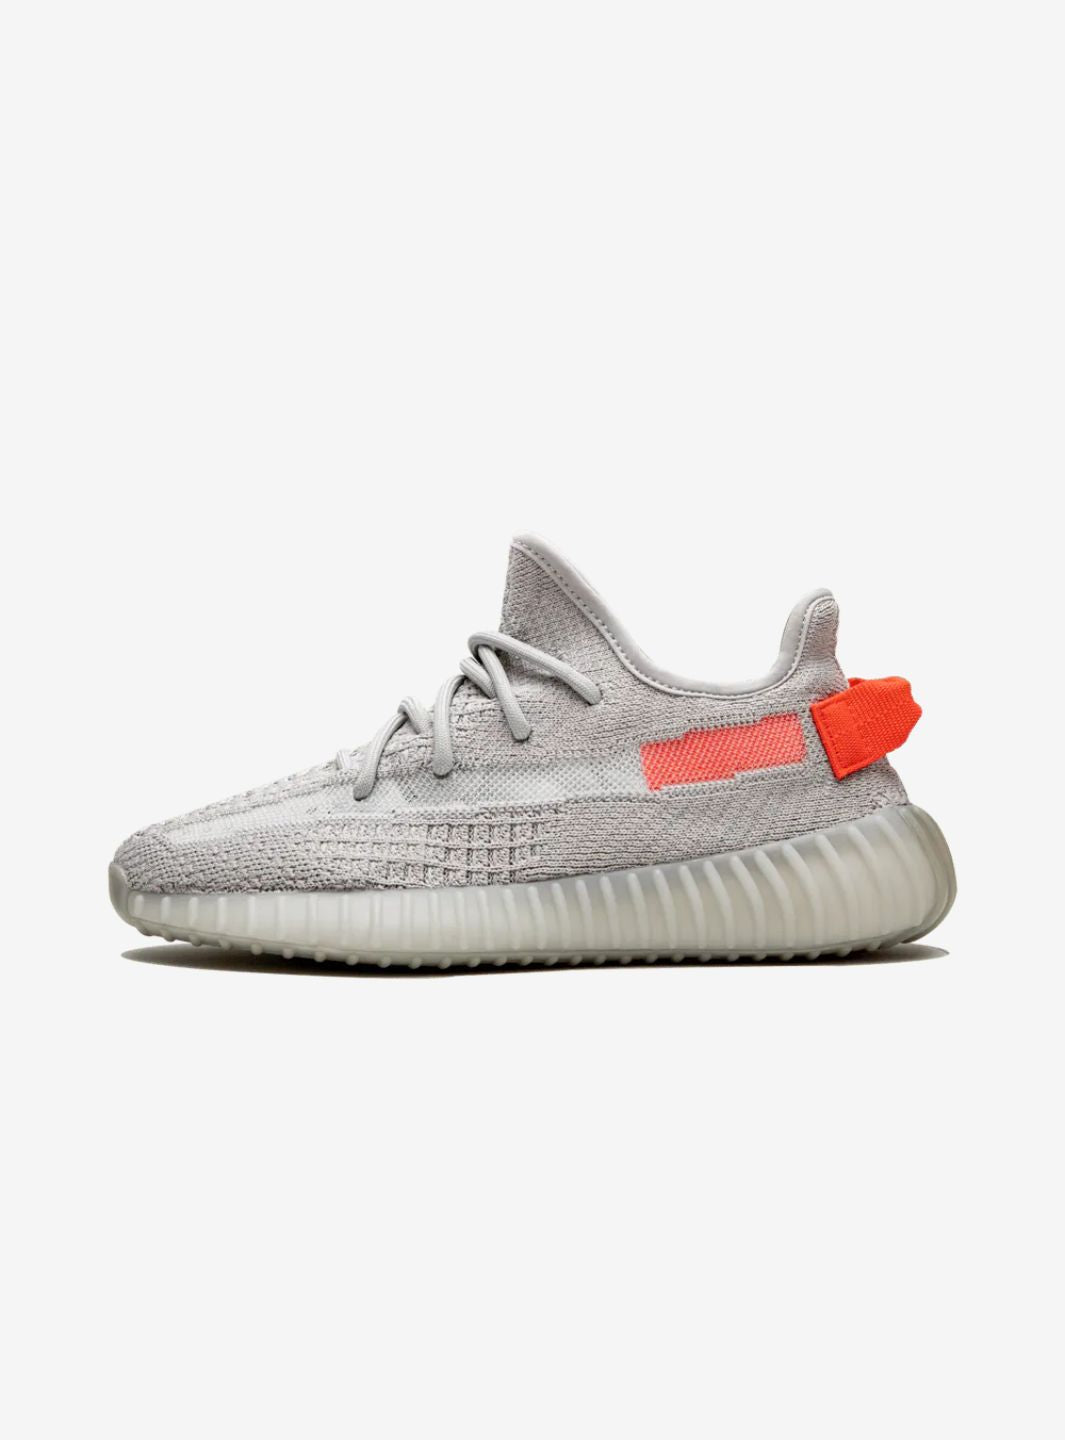 Adidas Yeezy Boost 350 V2 Tail Light - FX9017 | ResellZone